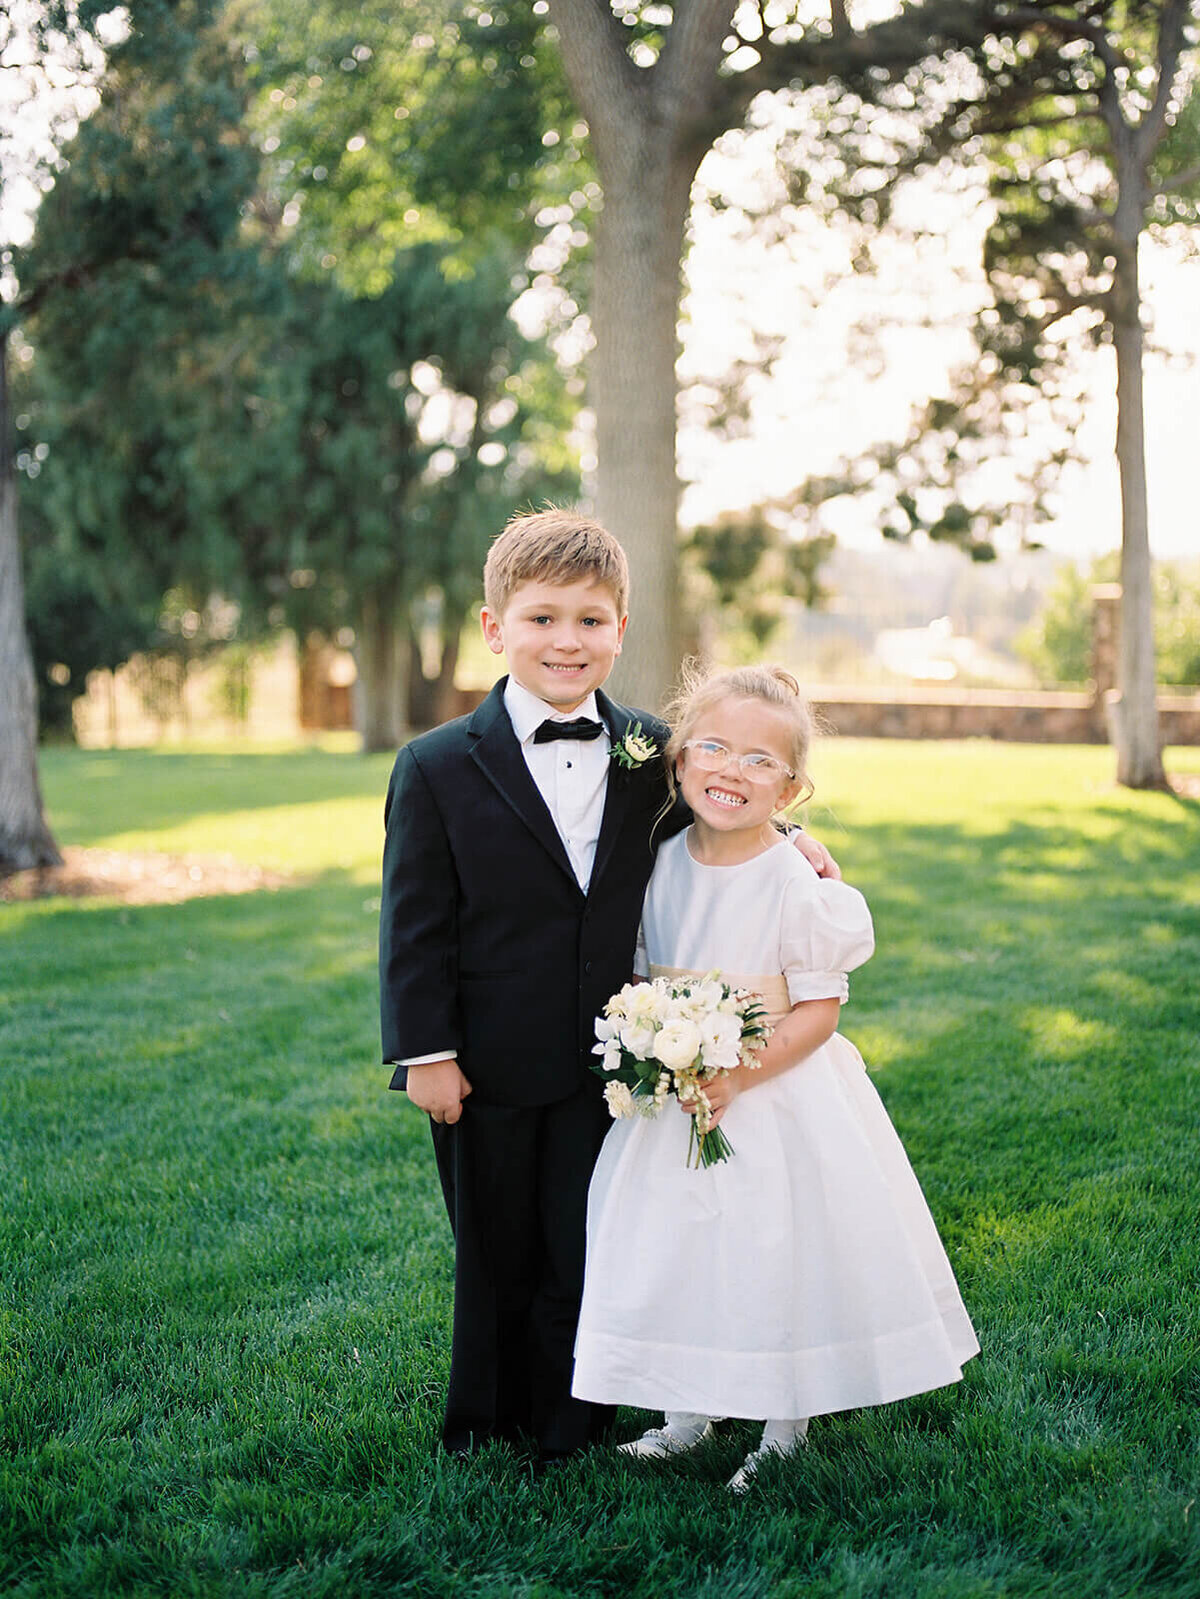 Flower girl and ring bearer at a Colorado wedding